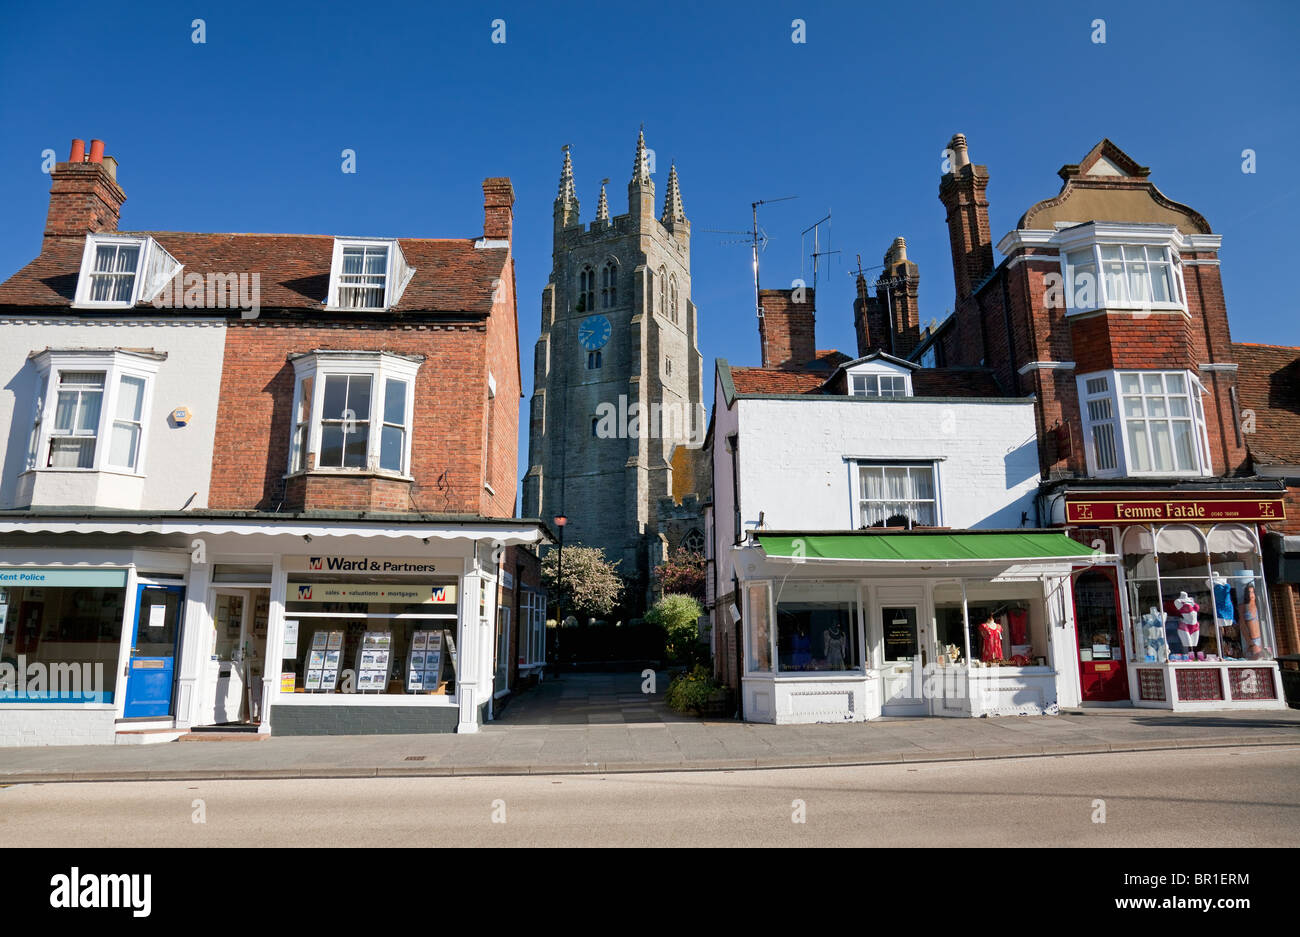 Tenterden High Street with traditional shops and St Mildred's Church, Tenterden, Kent, England, UK Stock Photo